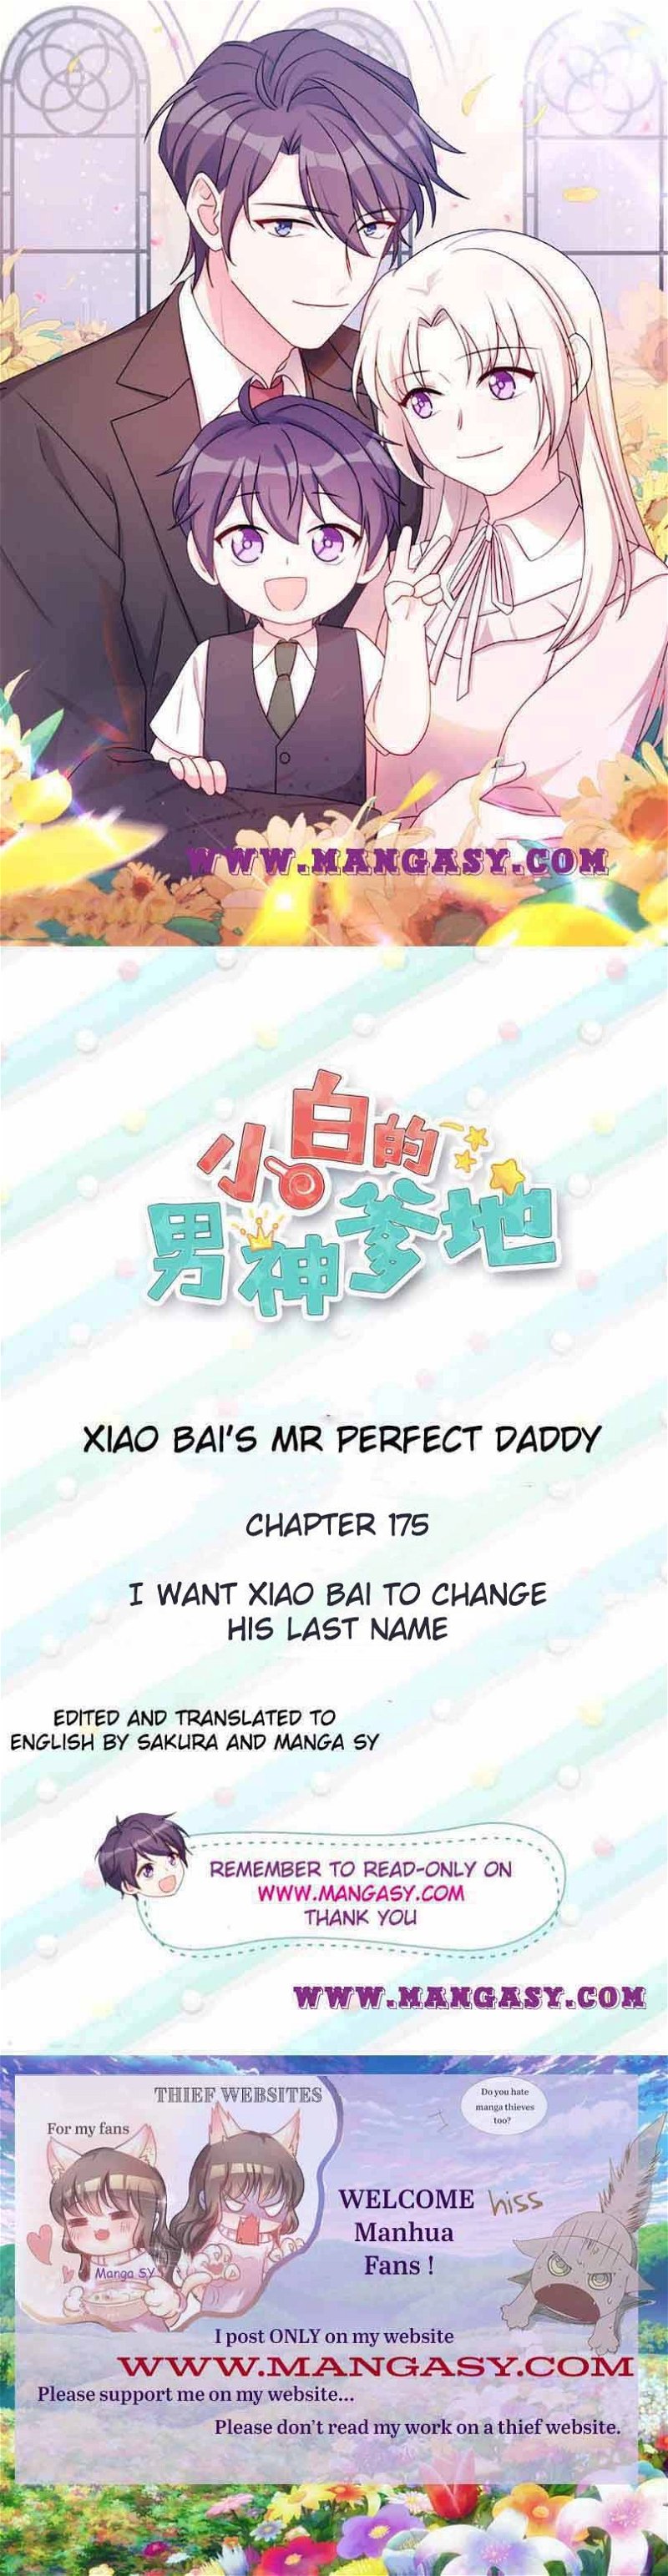 Xiao Bai’s father is a wonderful person Chapter 175 - Page 0